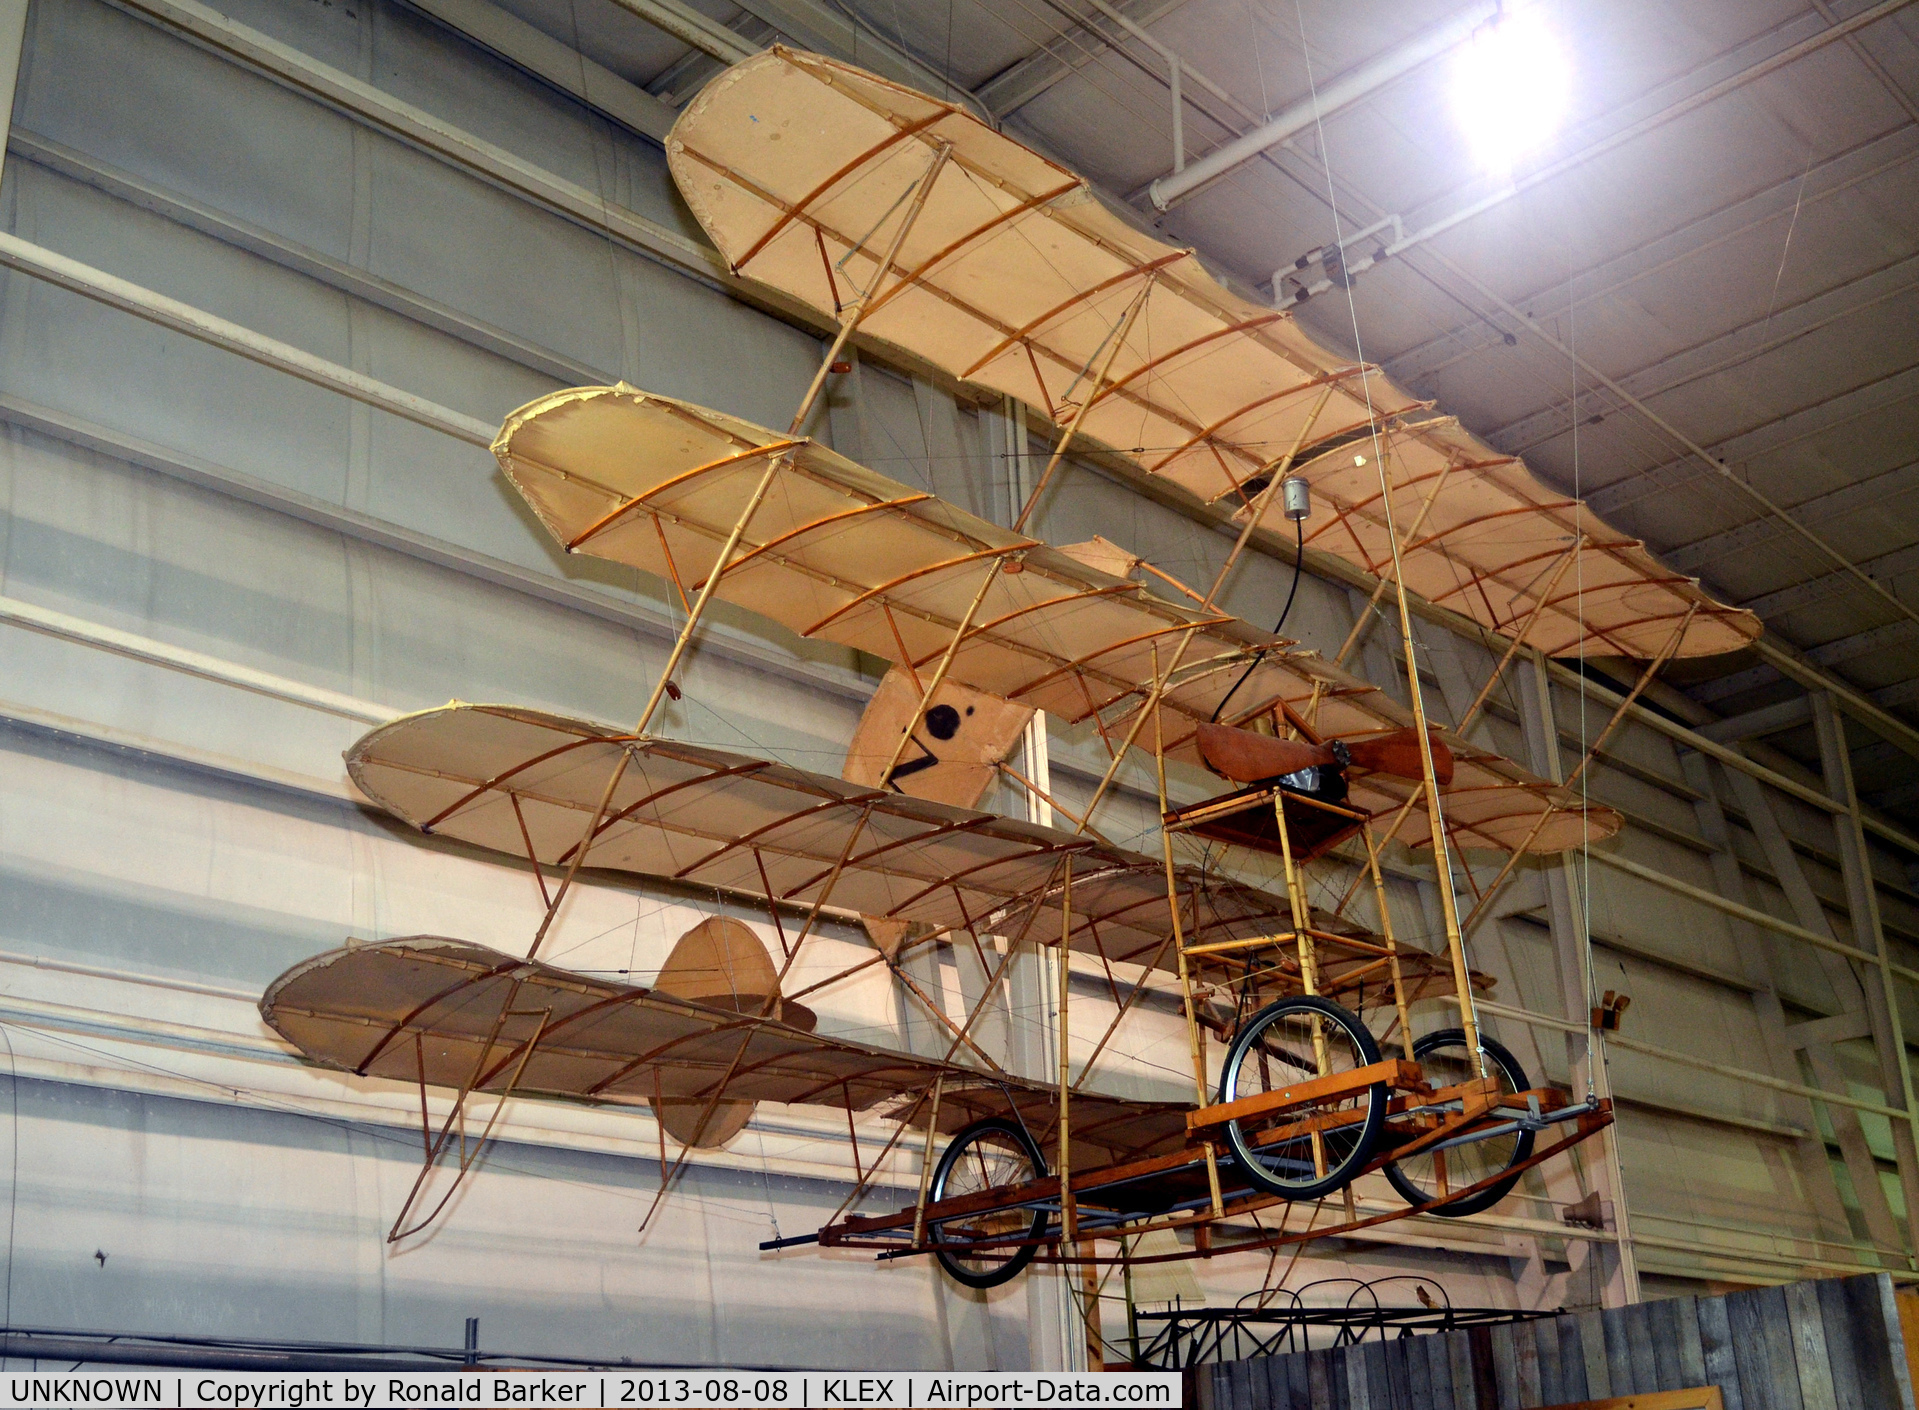 UNKNOWN, Miscellaneous Various C/N unknown, Replica of Matthew Bacon Sellers 1908 Quadruplane at the Aviation Museum of KY